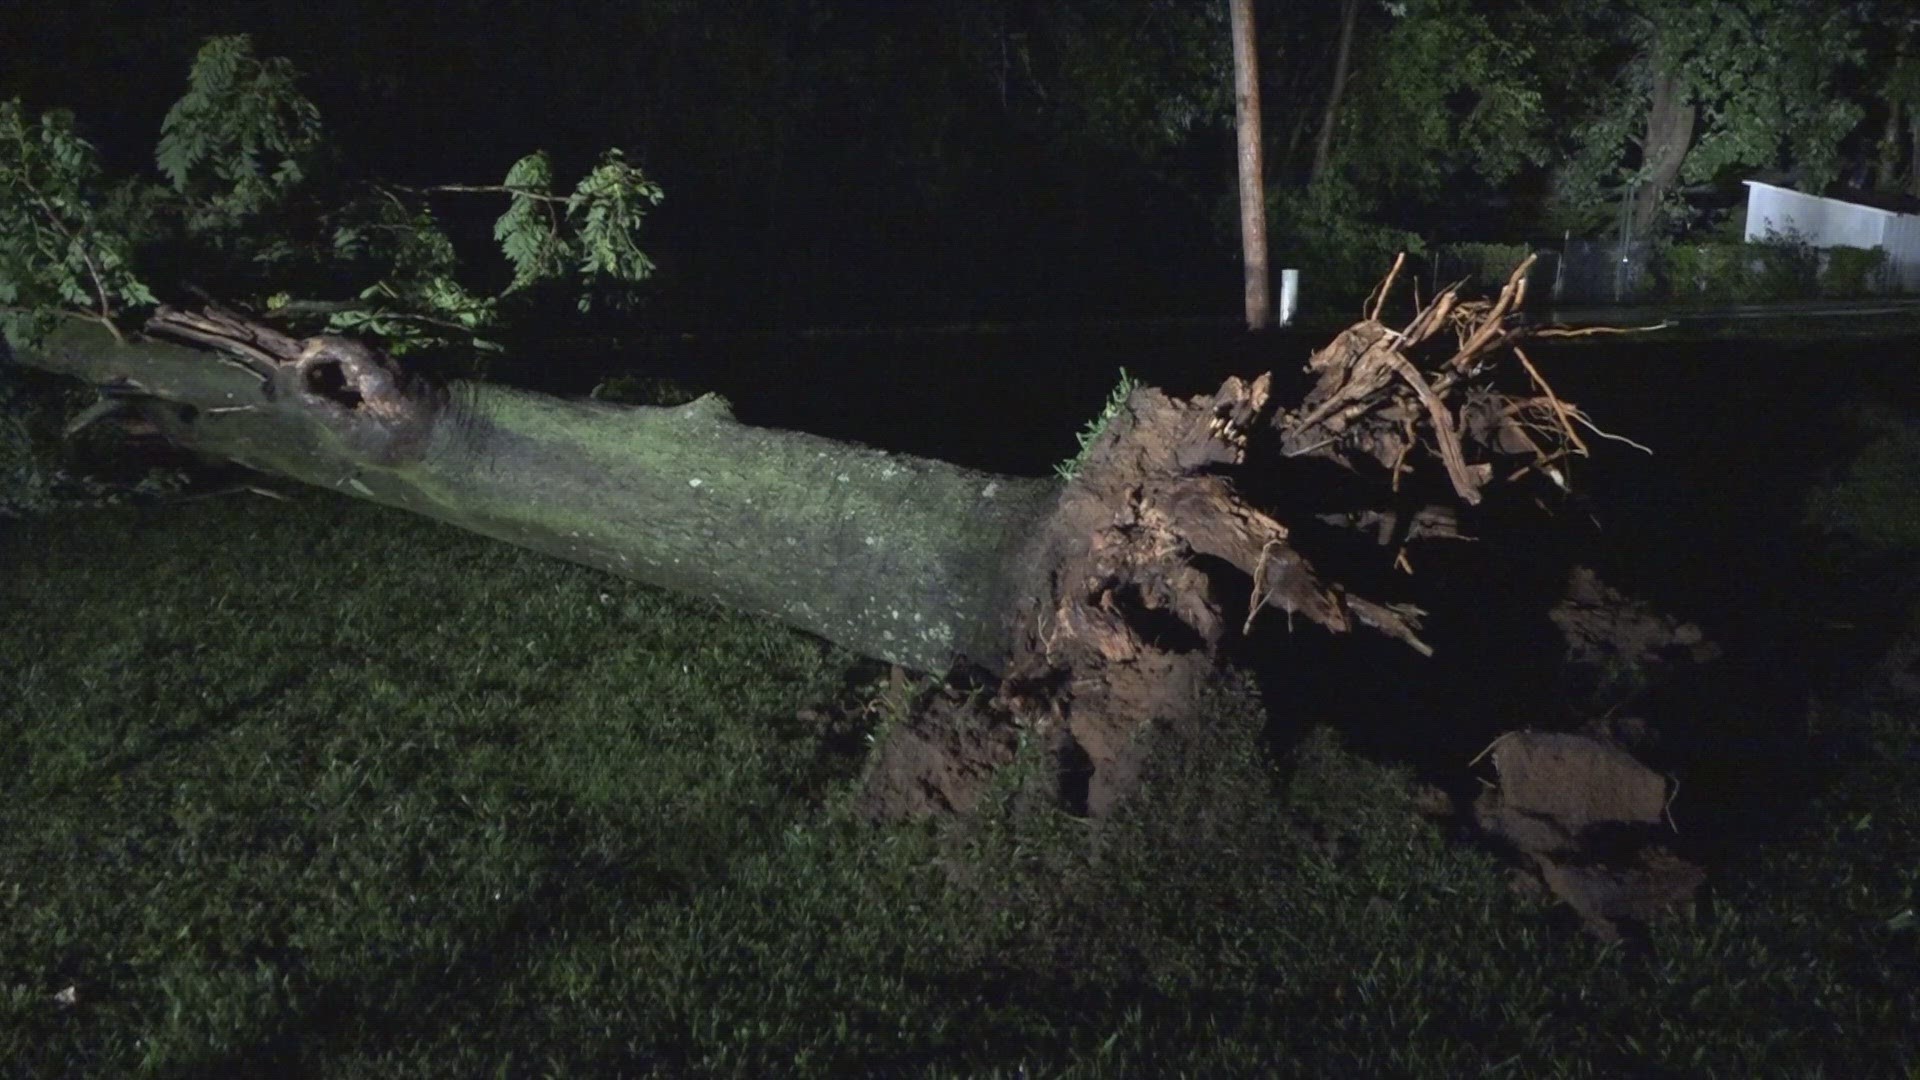 Wednesday night's storms left behind fairly minimal damage. There were some isolated reports of trees down and power outages in St. Louis and Jefferson counties.